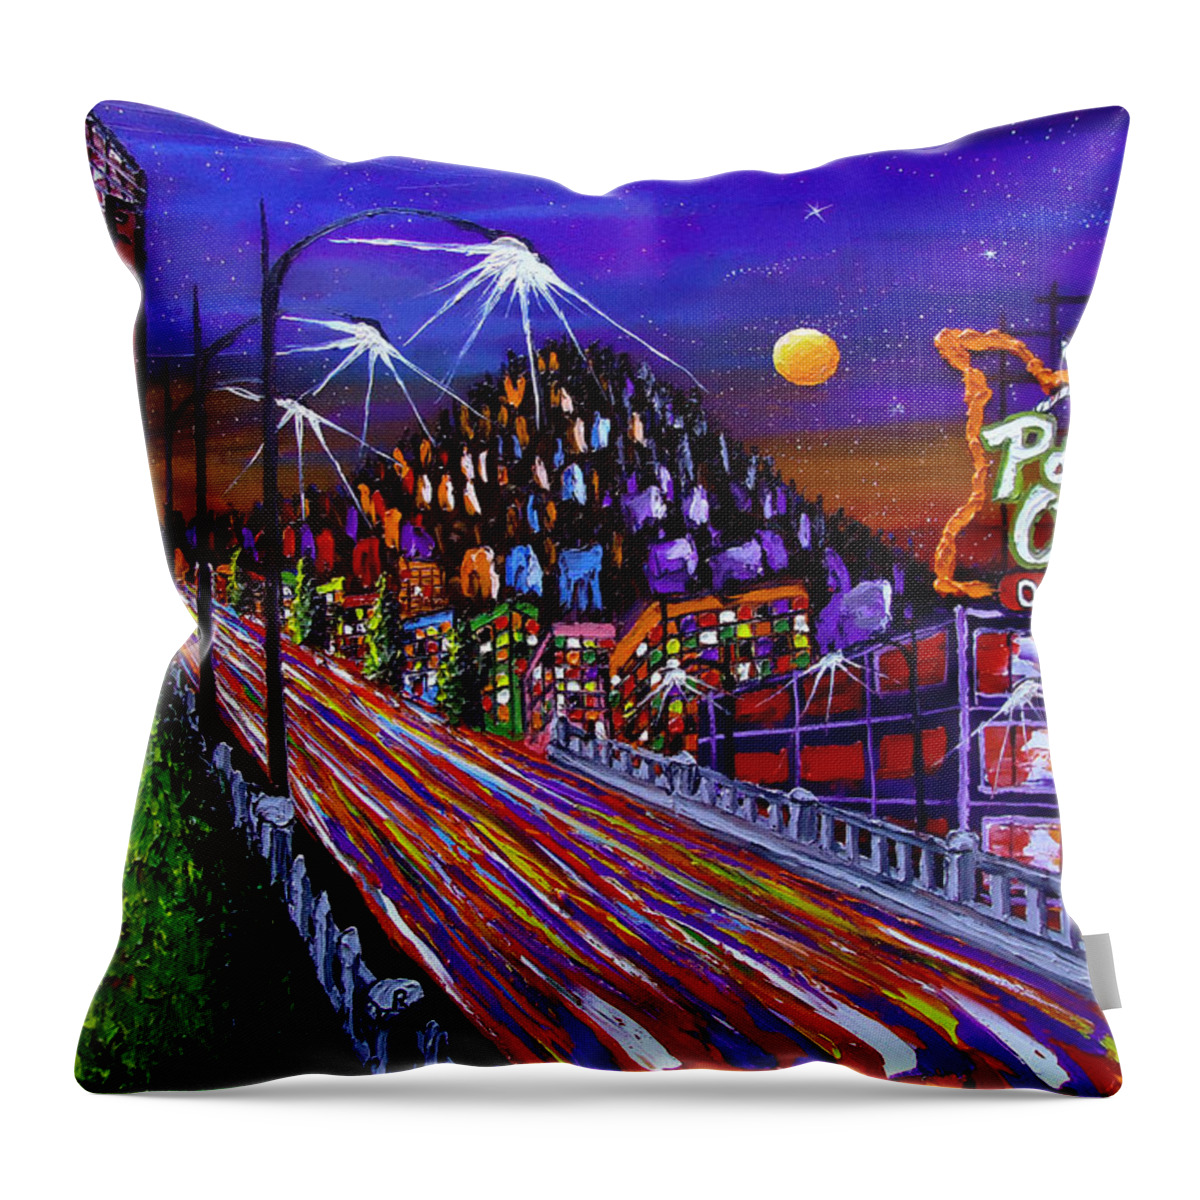  Throw Pillow featuring the painting Portland Starry Night #2 by James Dunbar